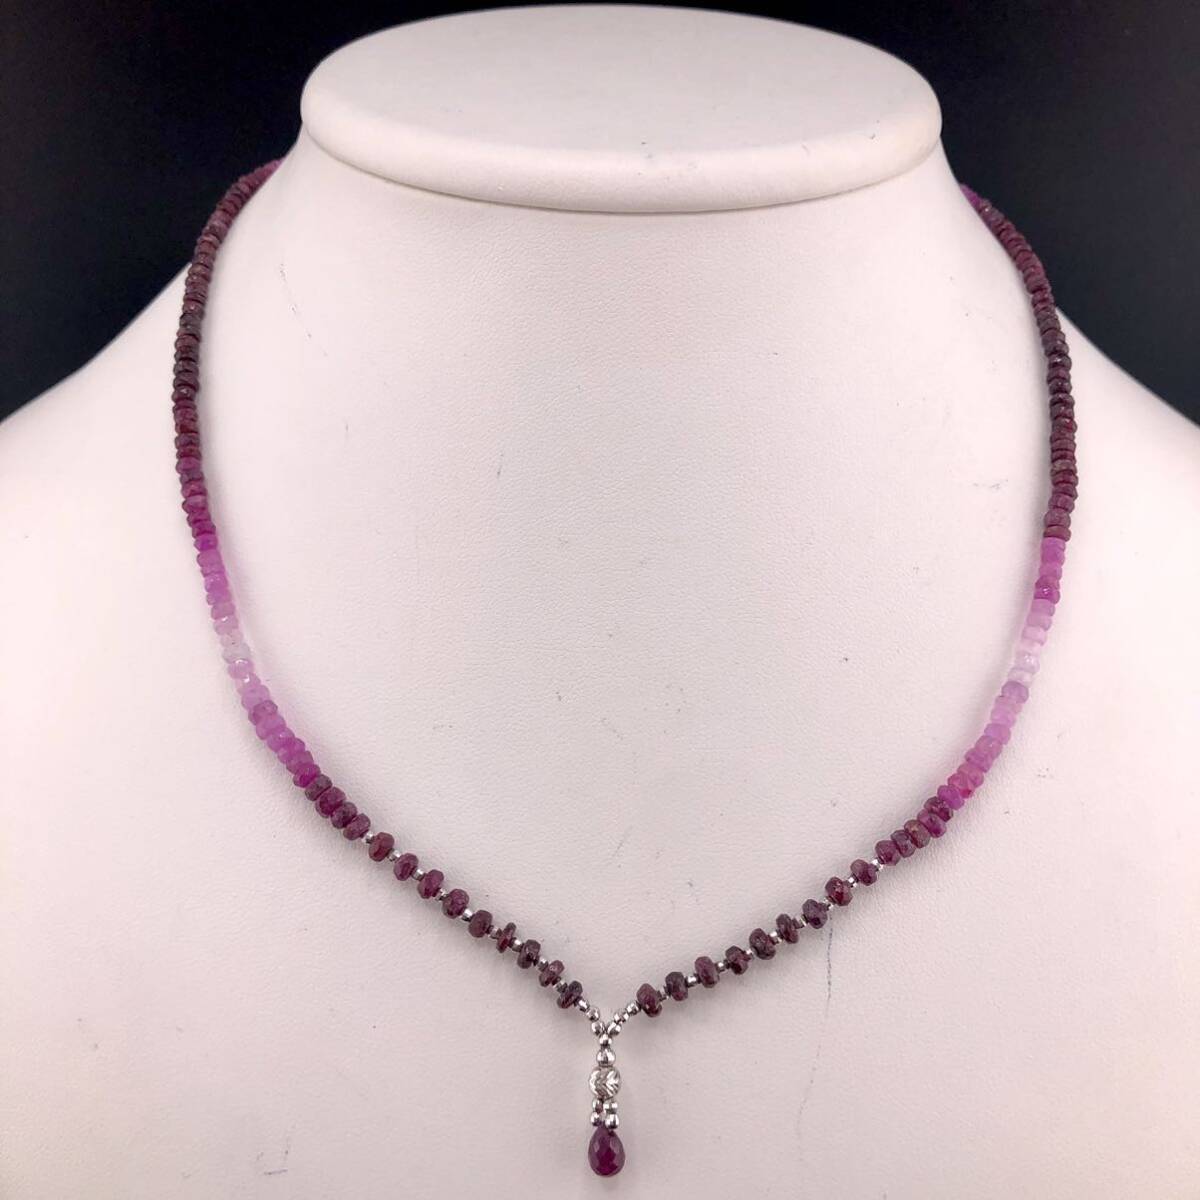 E04-4976 ルビーネックレス 10.3g ( ルビruby necklace K18WG accessory jewelry )の画像3